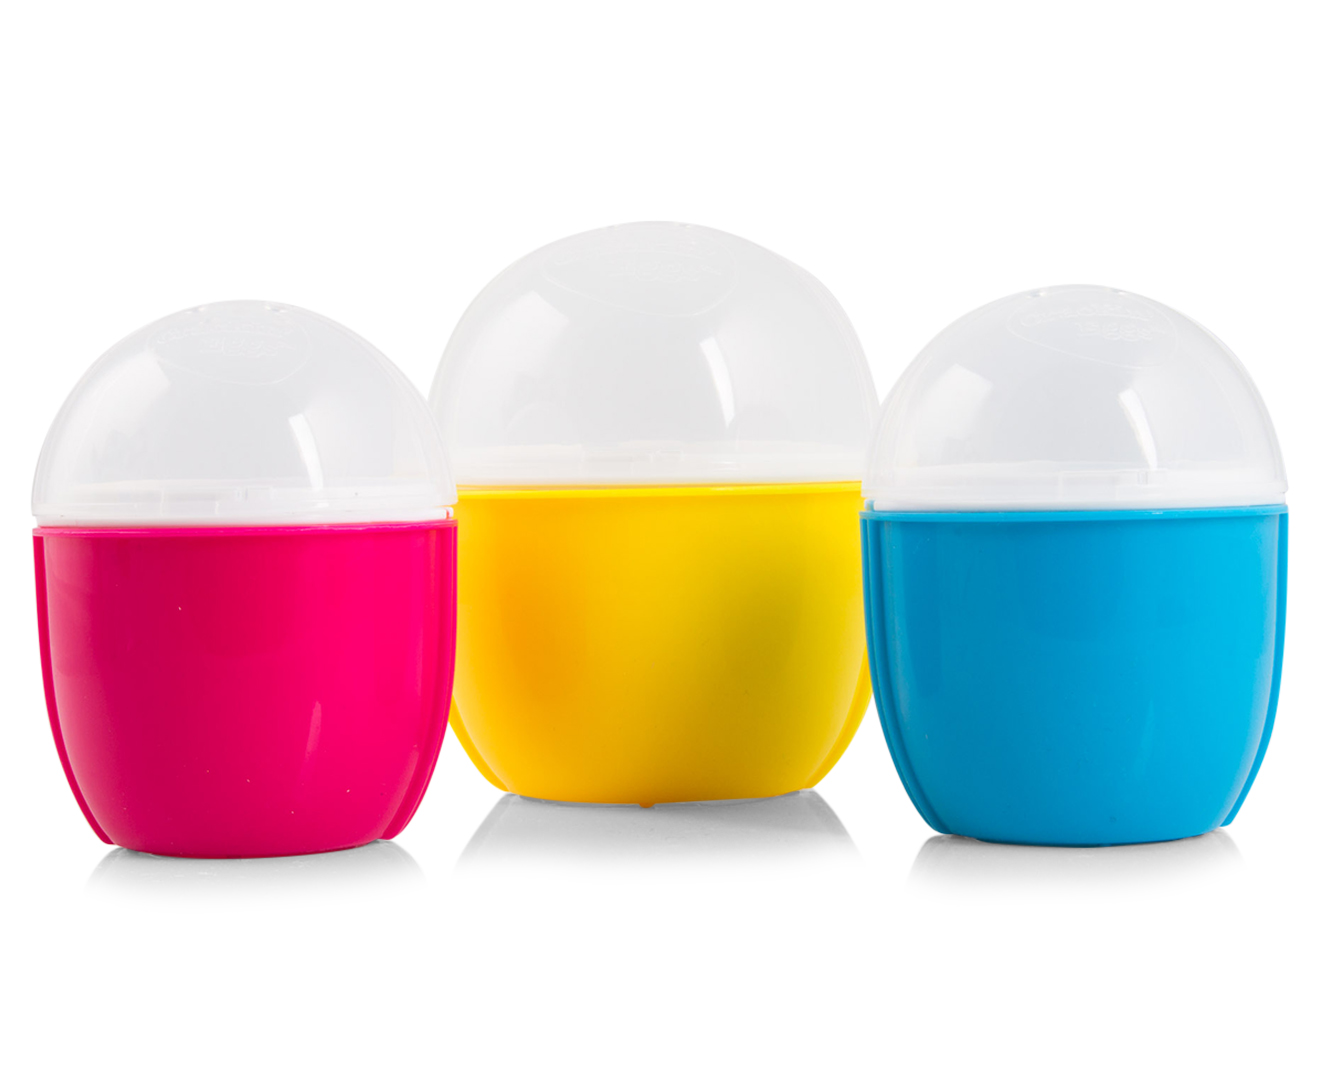 Crackin' Eggs Microwave Egg Cookers 3-Pack | Catch.com.au